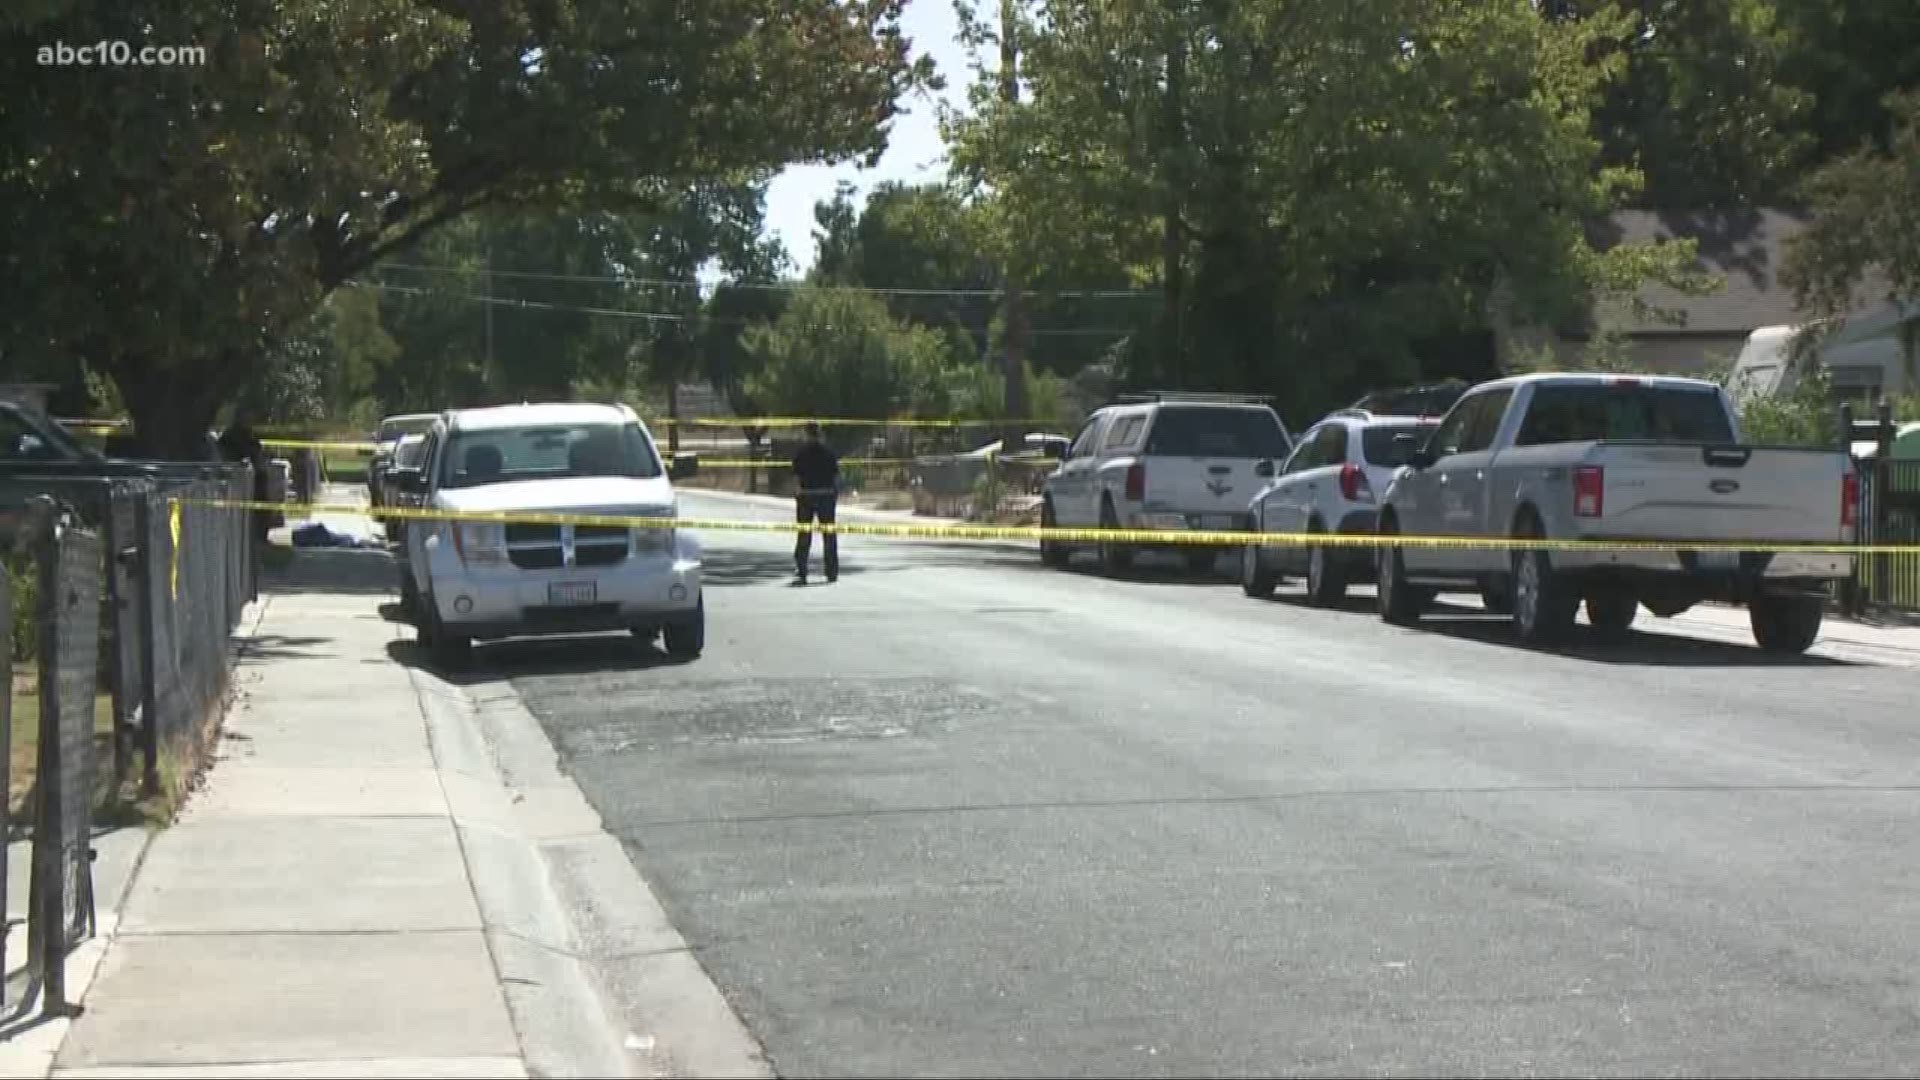 Calls to 911 are shedding some new light on a shooting in West Sac that left a woman in her 50s dead and a man in his 80s behind bars.